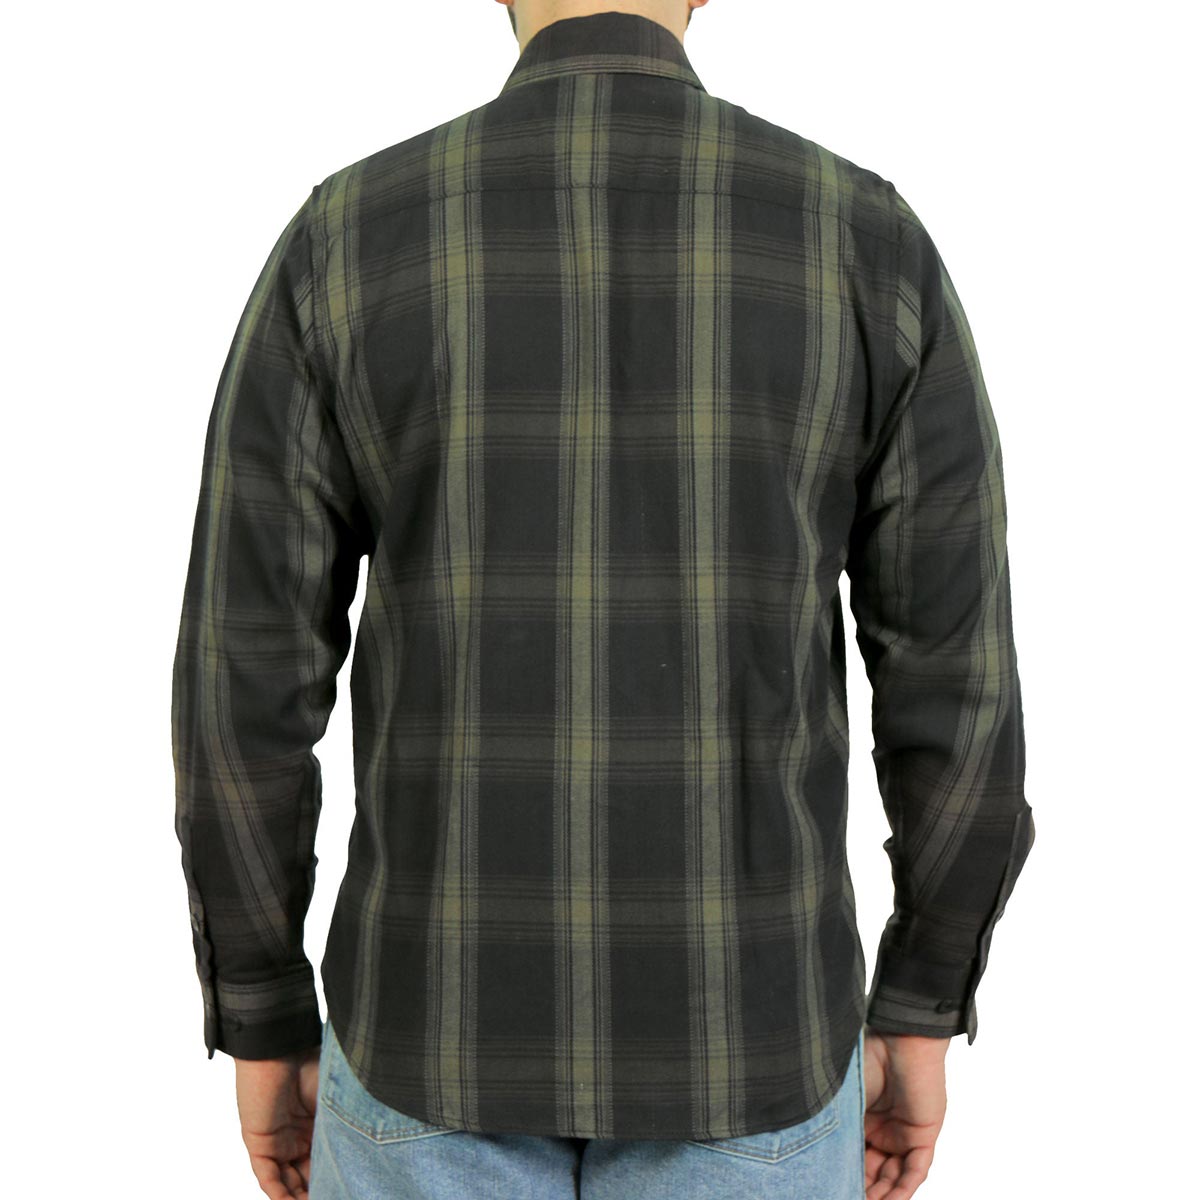 Hot Leathers FLM2018 Men's Black and Green Long Sleeve Flannel Shirt